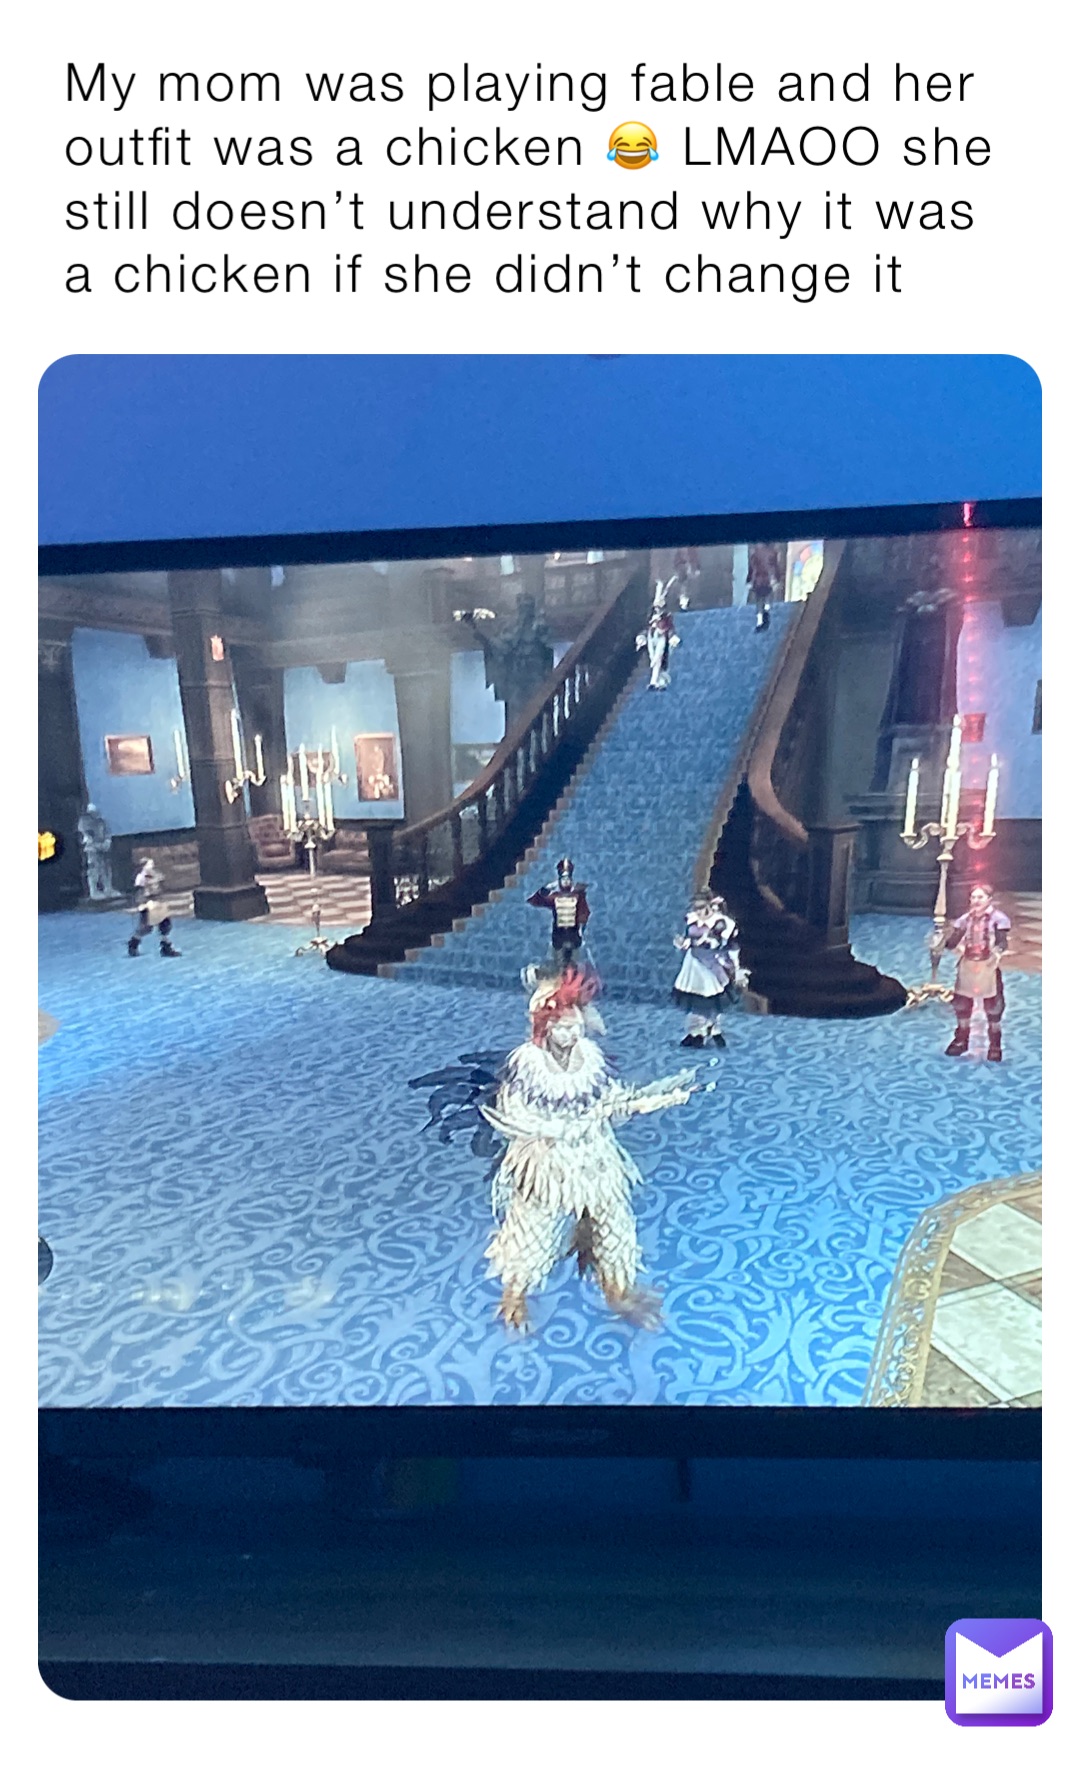 My mom was playing fable and her outfit was a chicken 😂 LMAOO she still doesn’t understand why it was a chicken if she didn’t change it